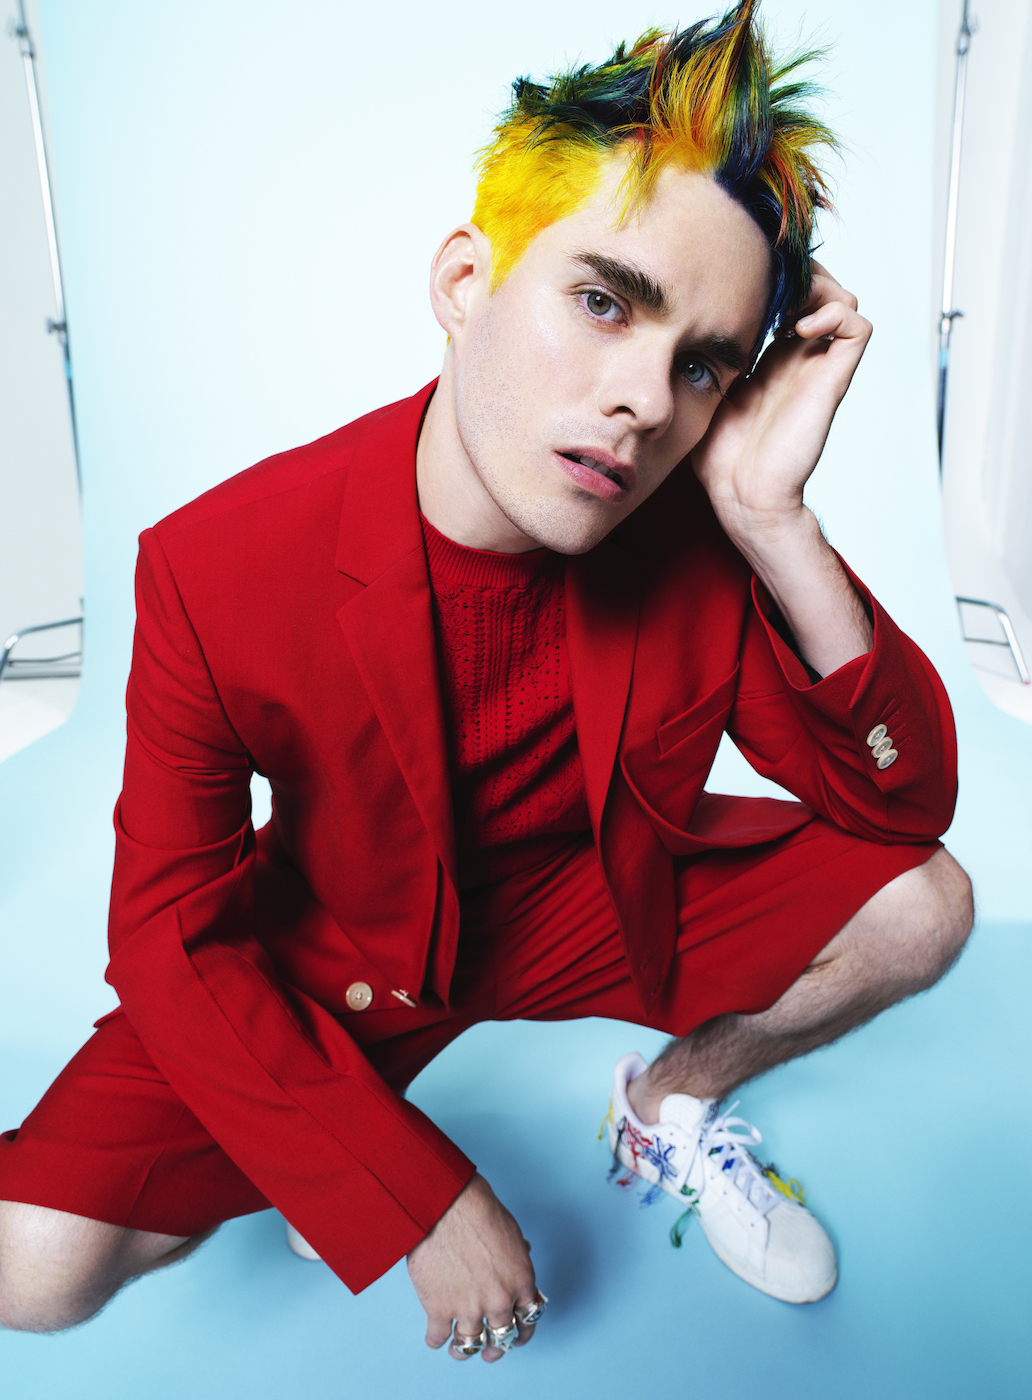  Awsten wears: All clothing Fendi, Shoes and rings his own